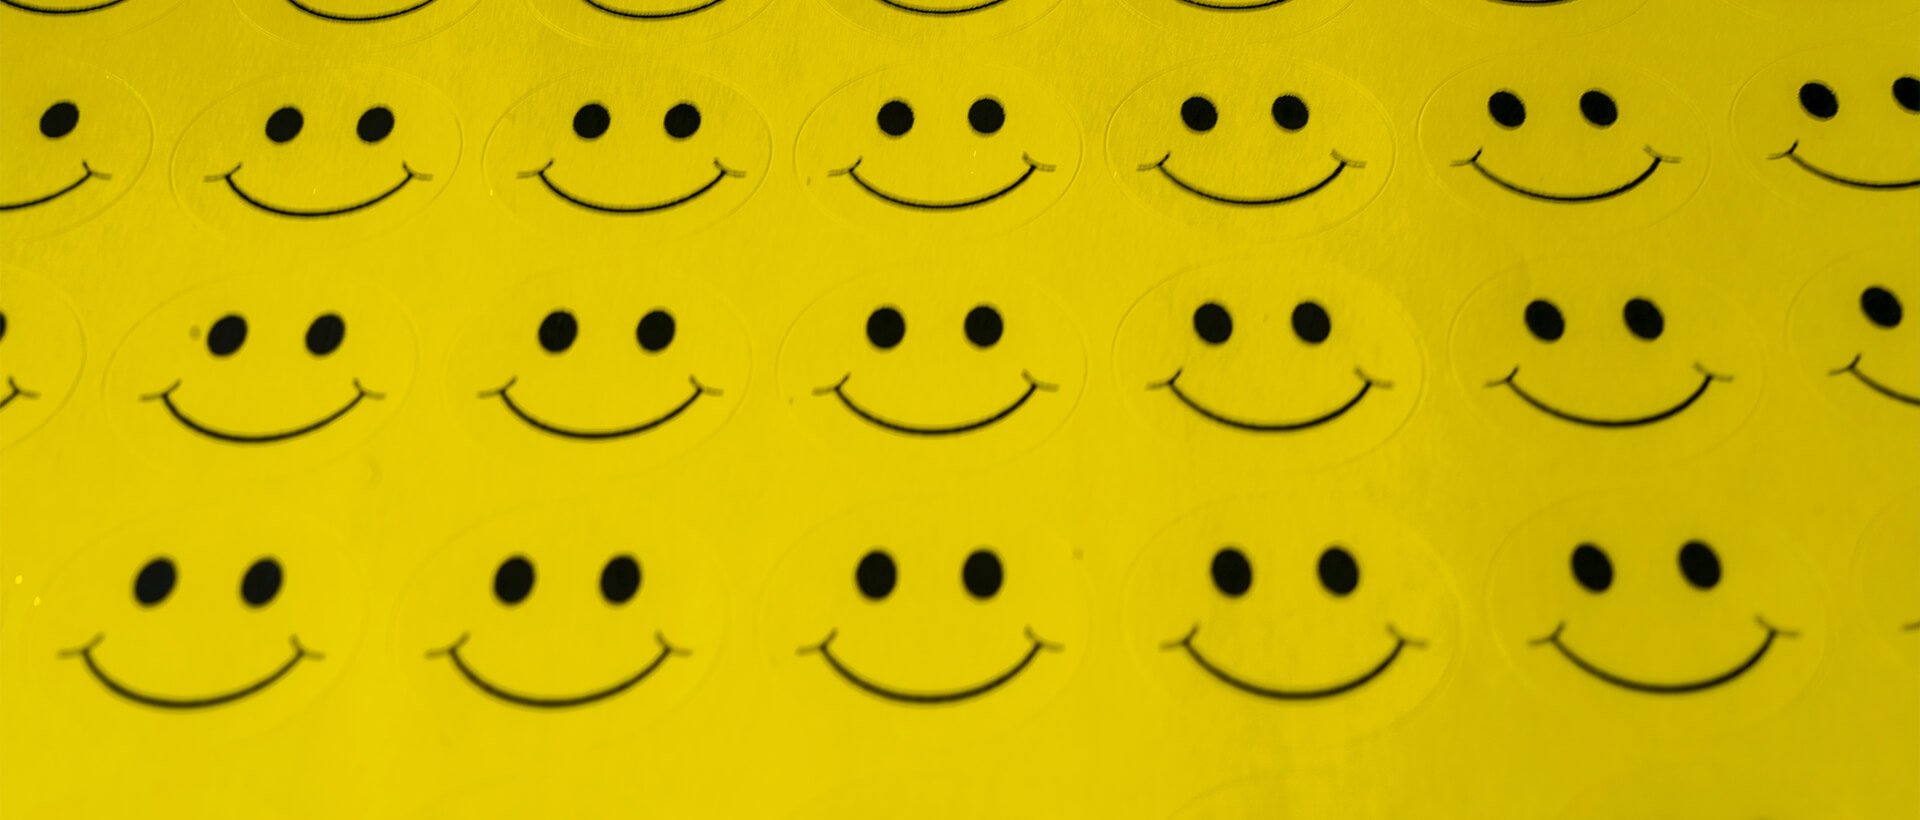 a group of smiley faces on a yellow background.